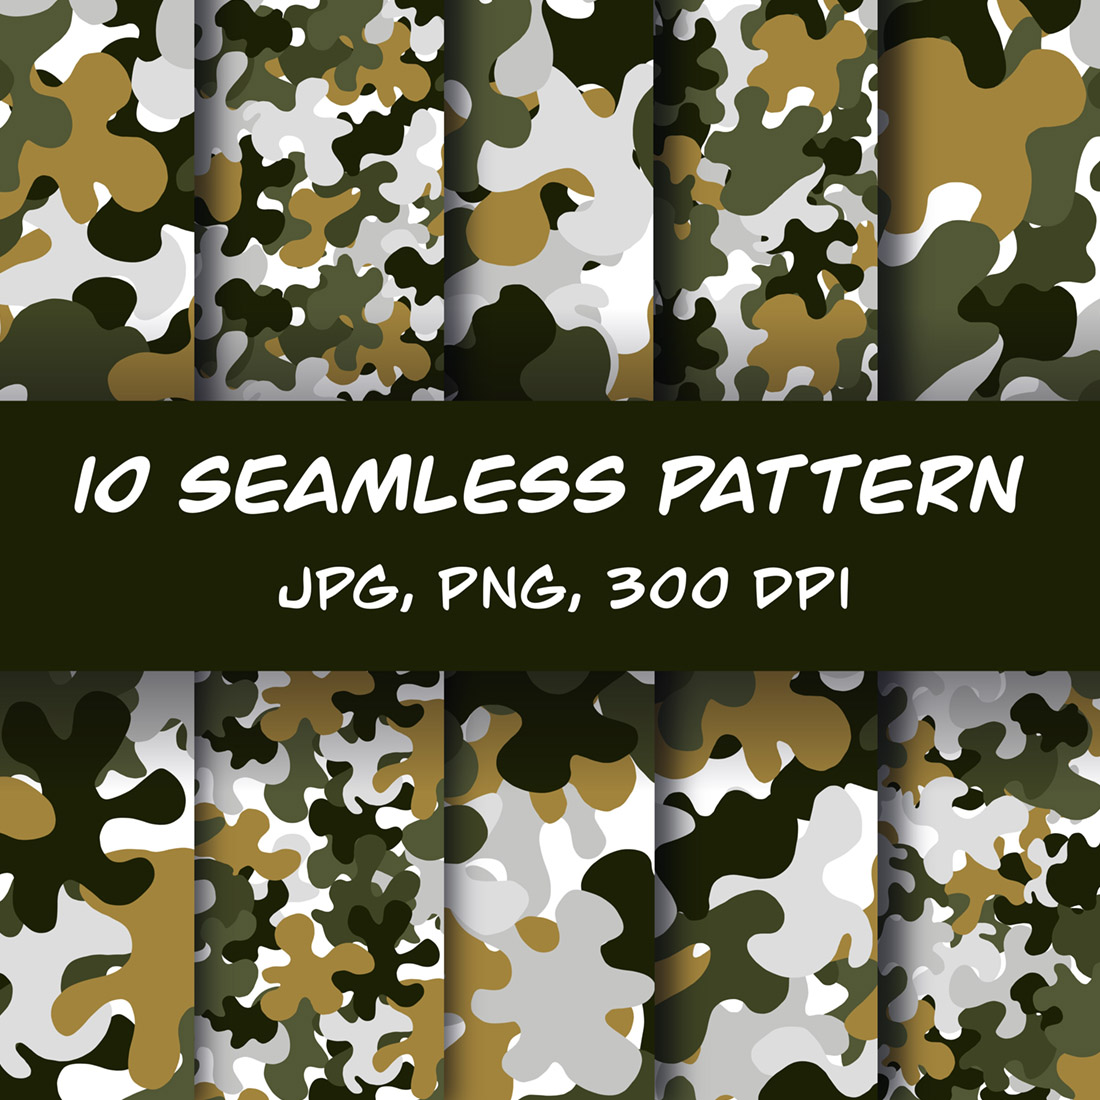 Camouflage Seamless Pattern 10 Army Print Png, Jpg, Camo Digital Paper Military Texture Scrapbooking 12 cover image.